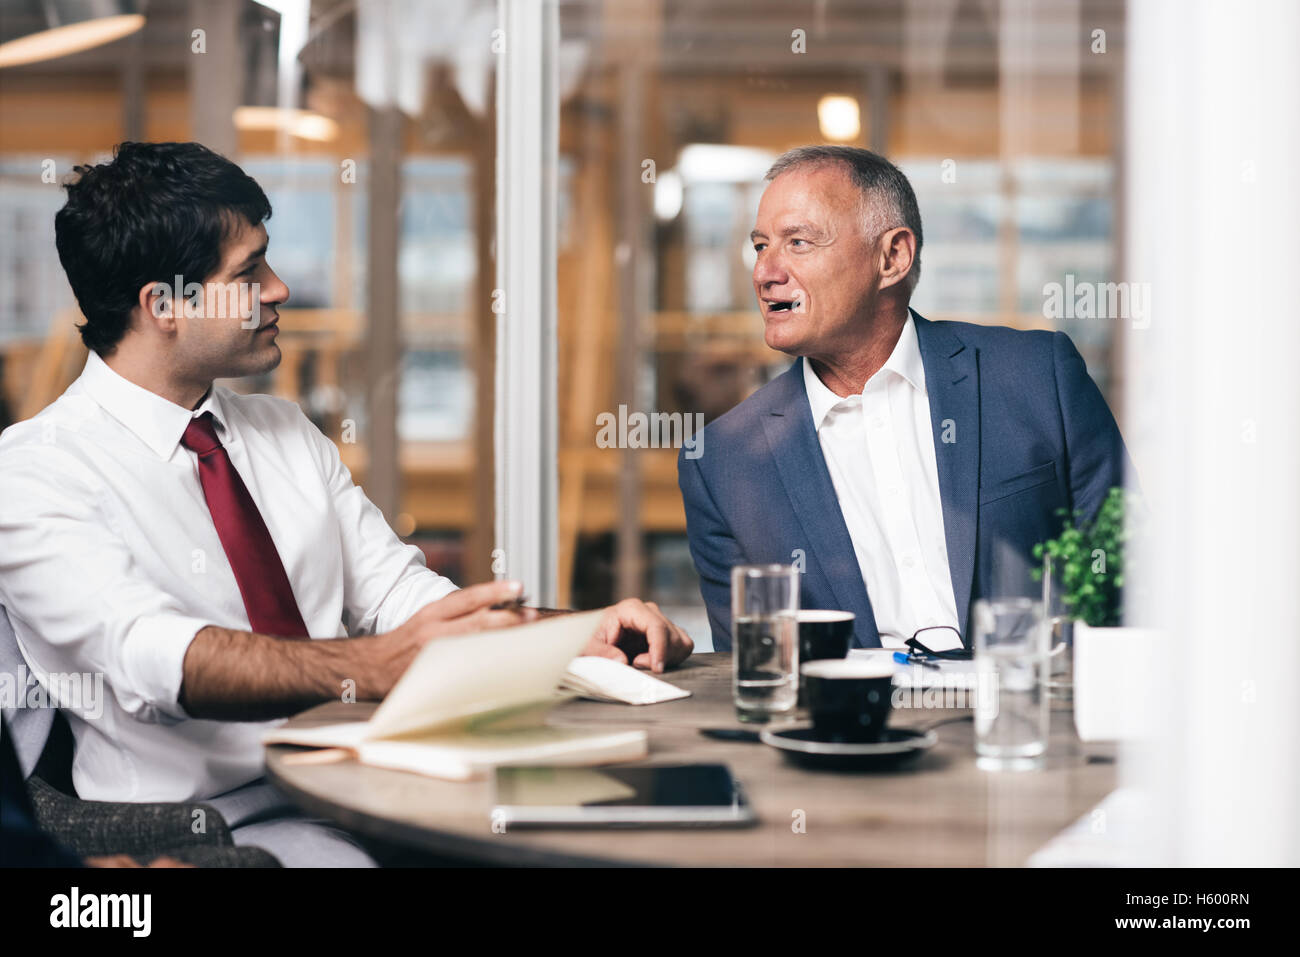 Passing on his business experience Stock Photo